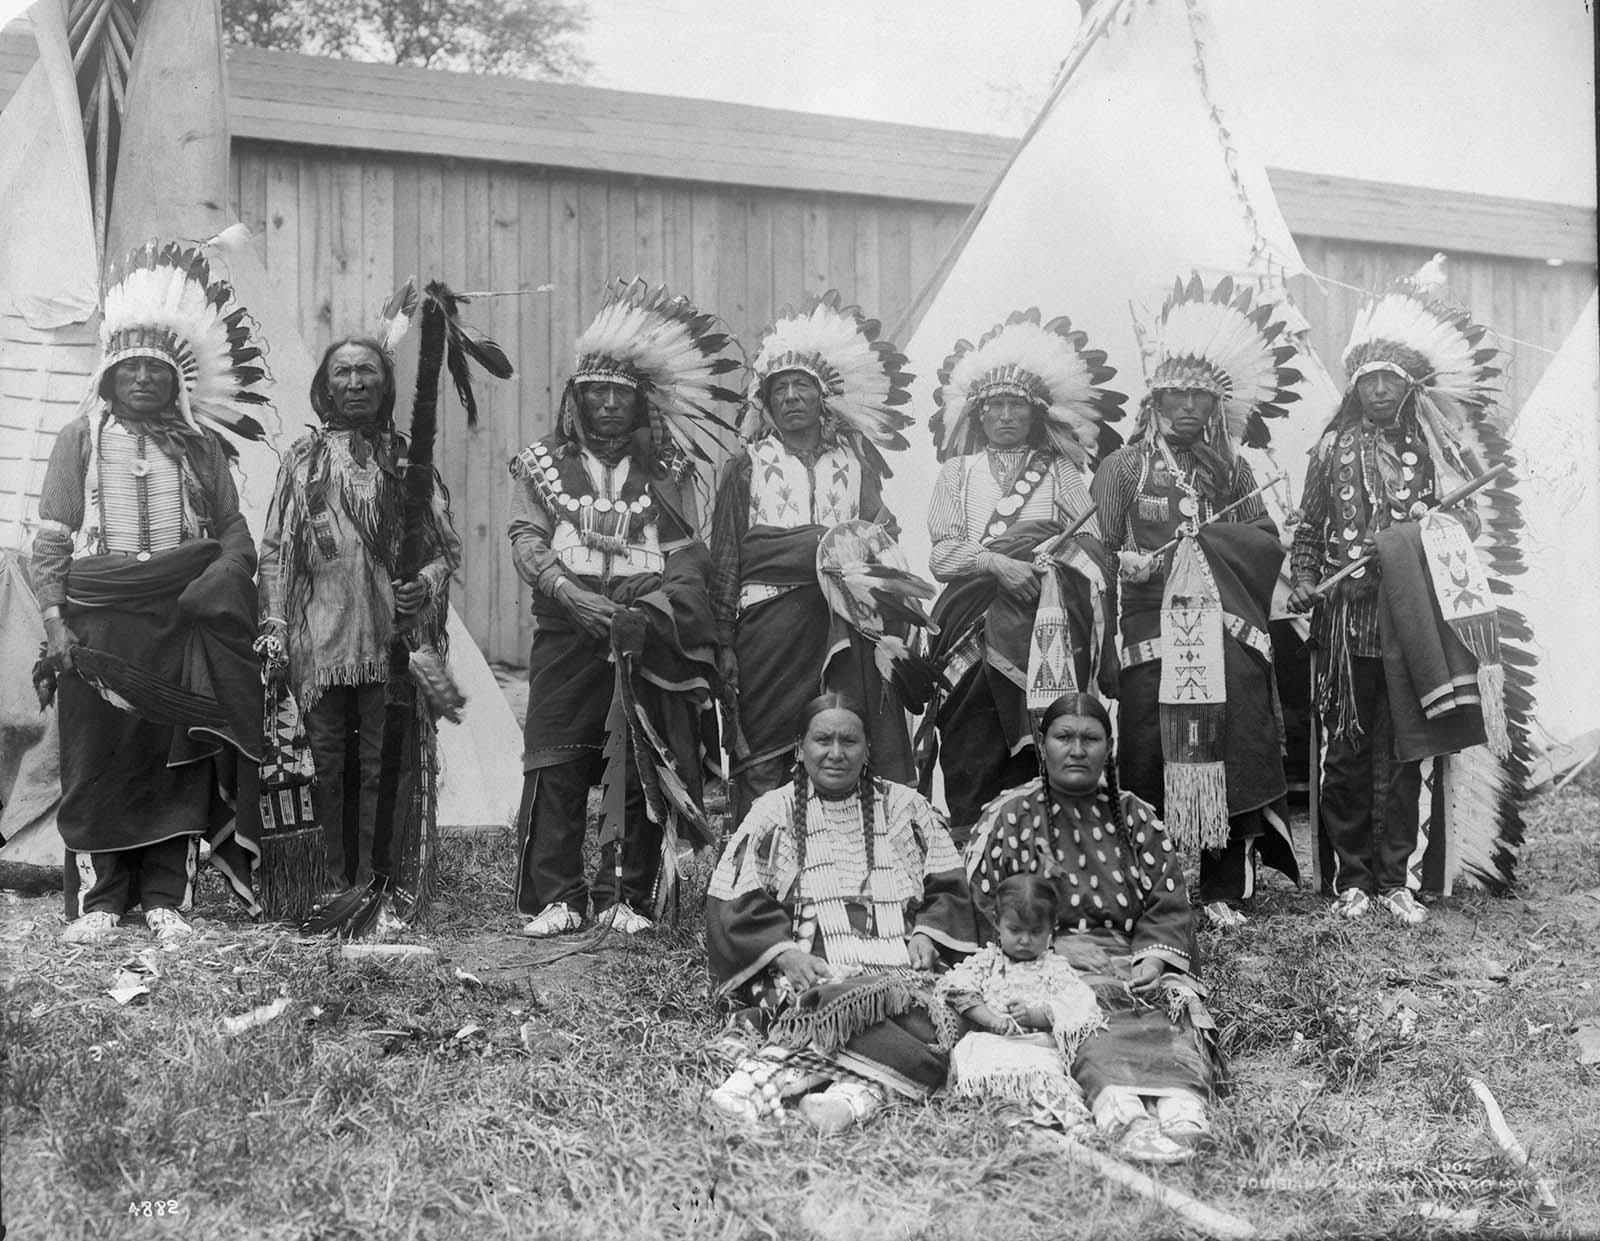 Chief Yellow Hair and his council standing in front of replicas of teepees at a human zoo at the 1904 World’s Fair in St Louis, Missouri.